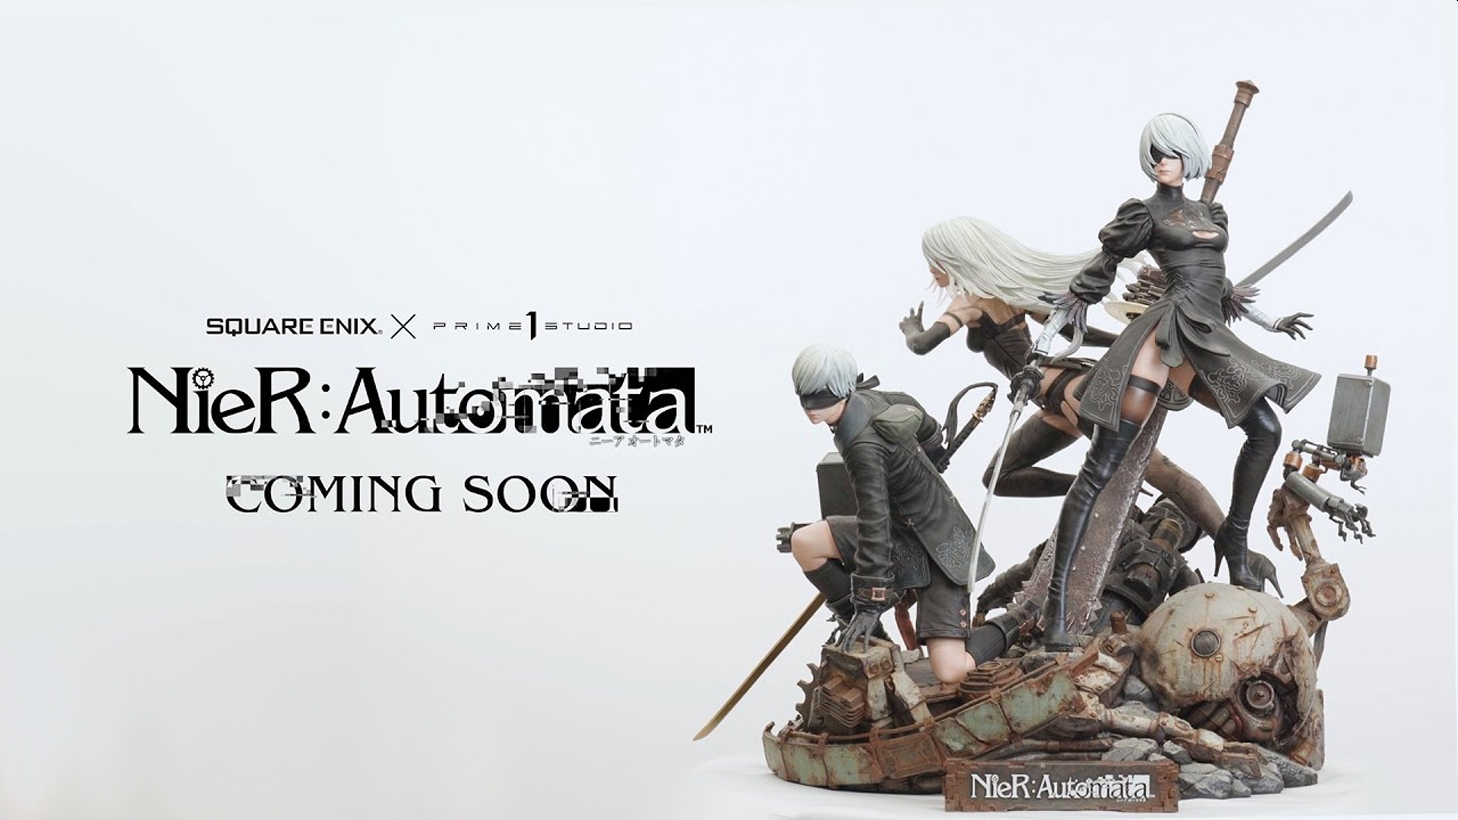 The First Statue In The New Square Enix Masterline Brand Features NieR: Automata’s 2B, 9S, and A2